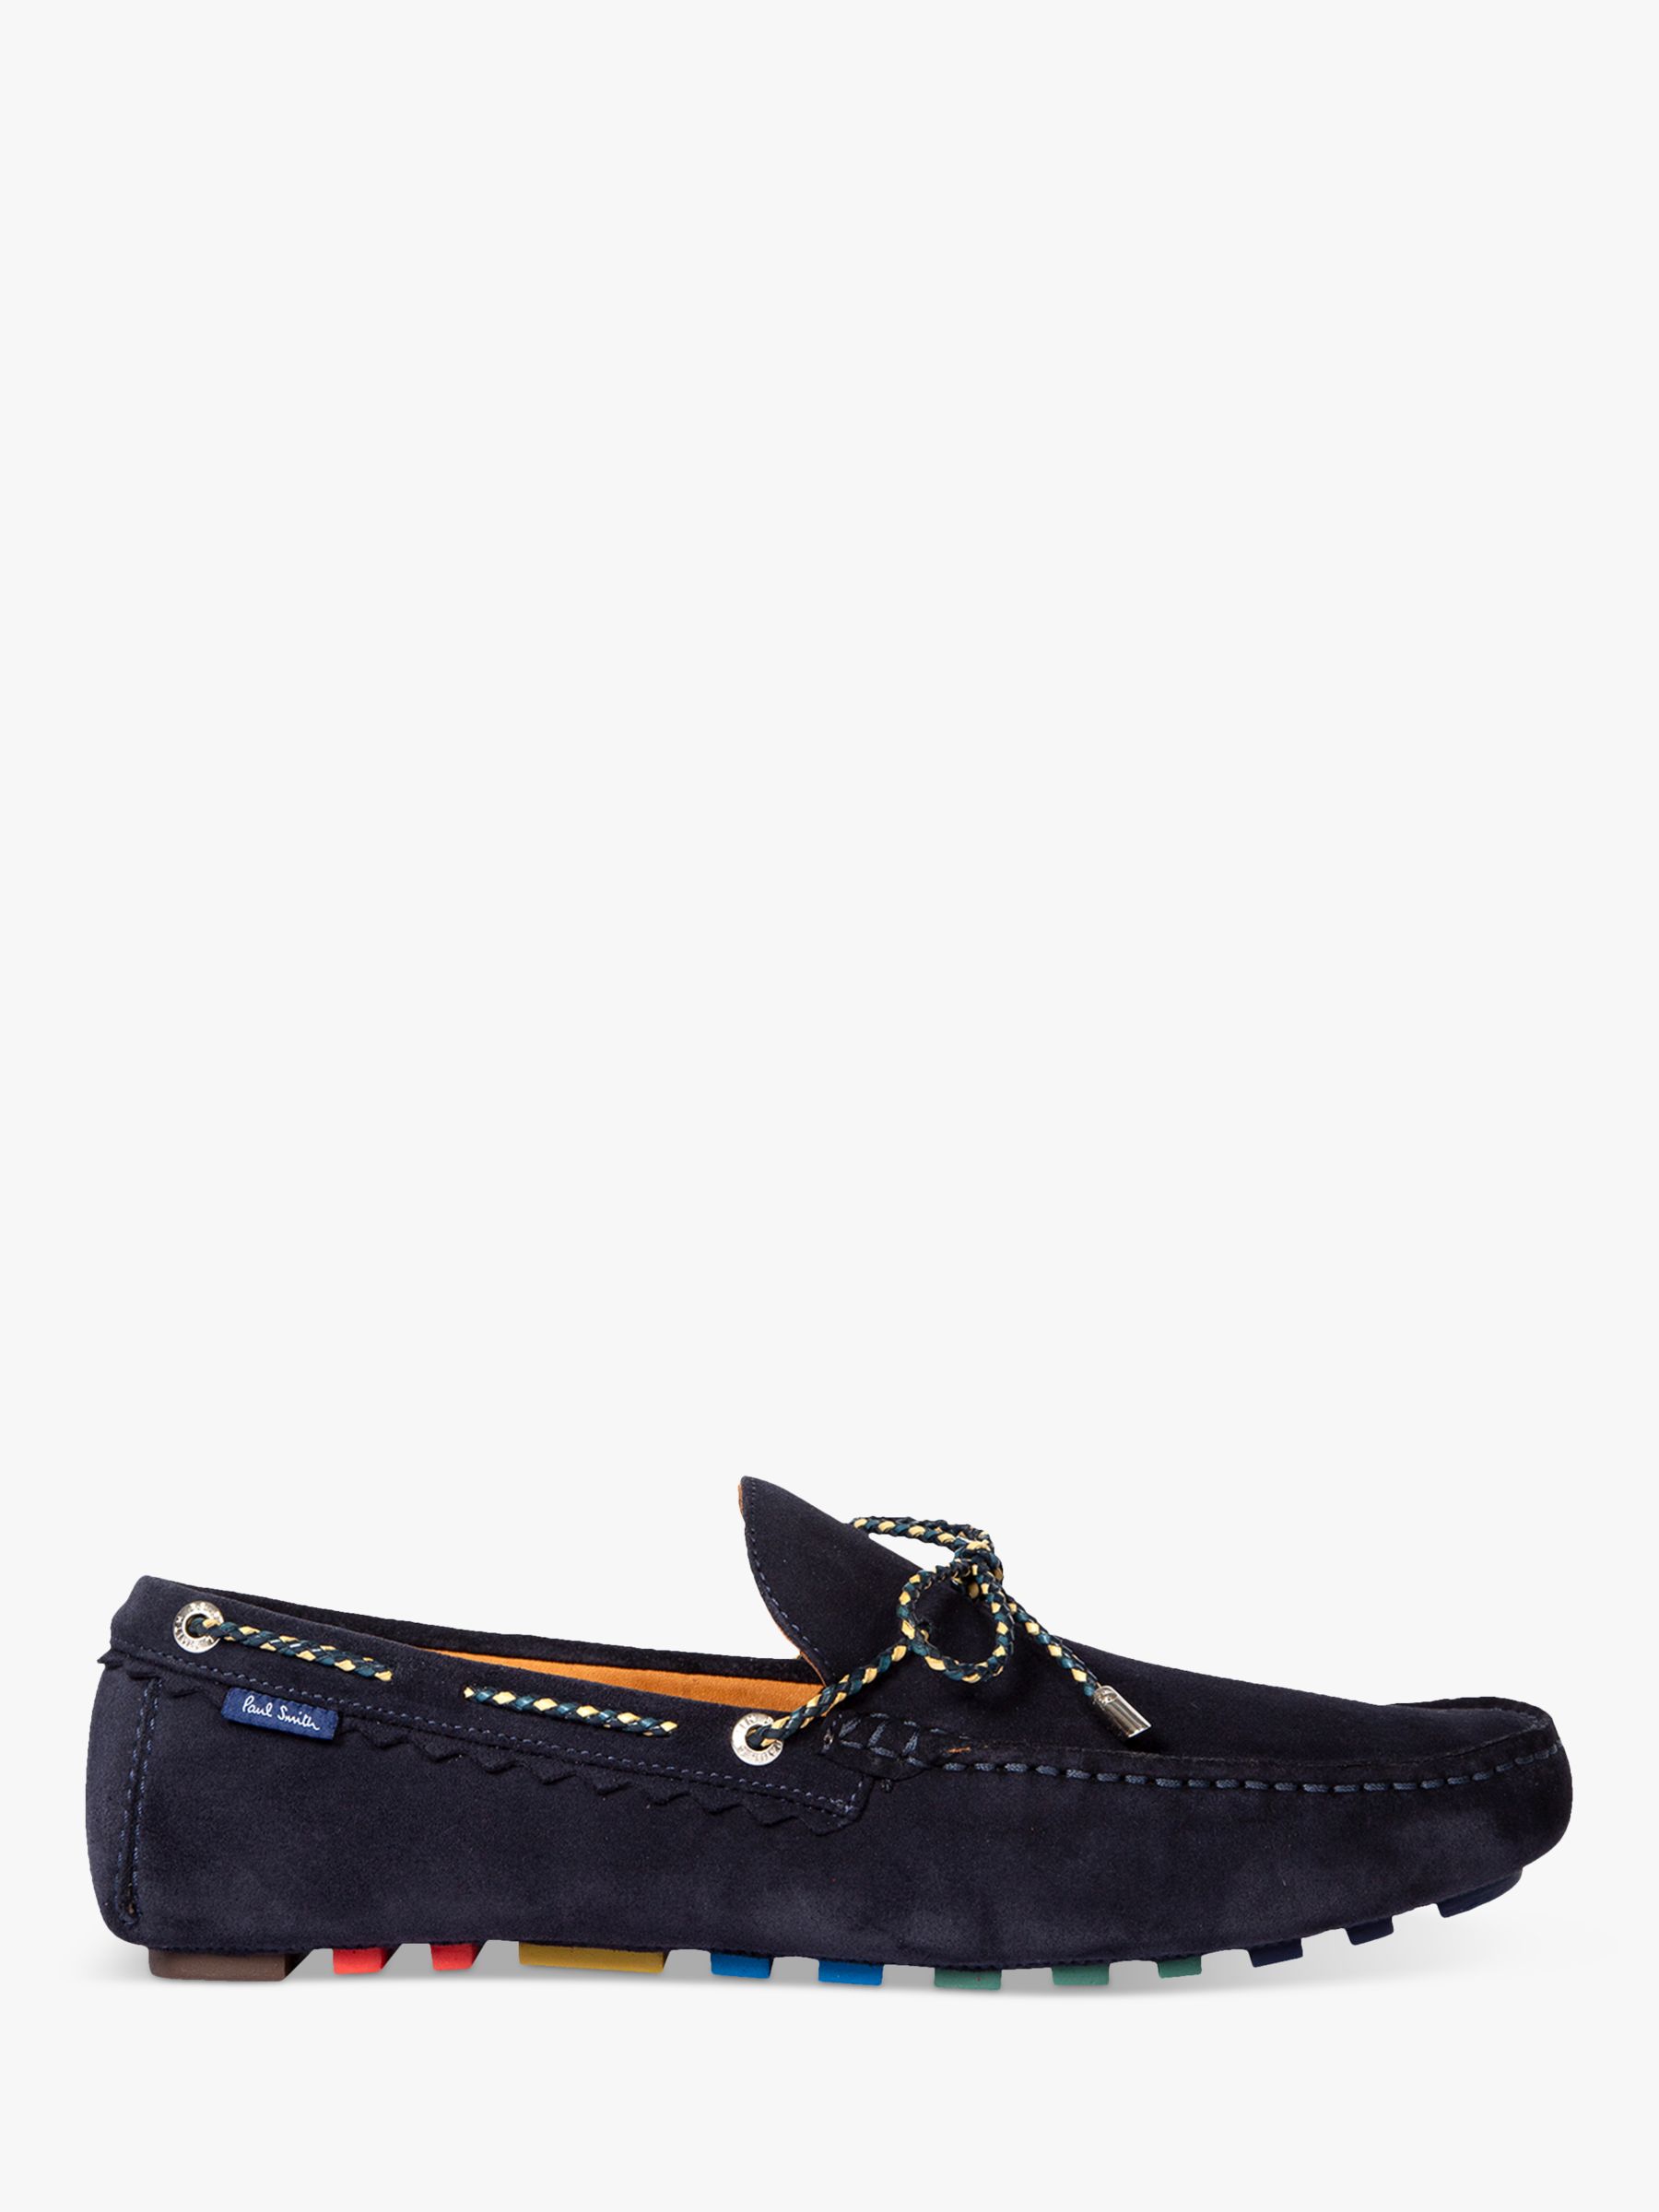 Paul Smith Springfield Suede Loafers, Navy, 7